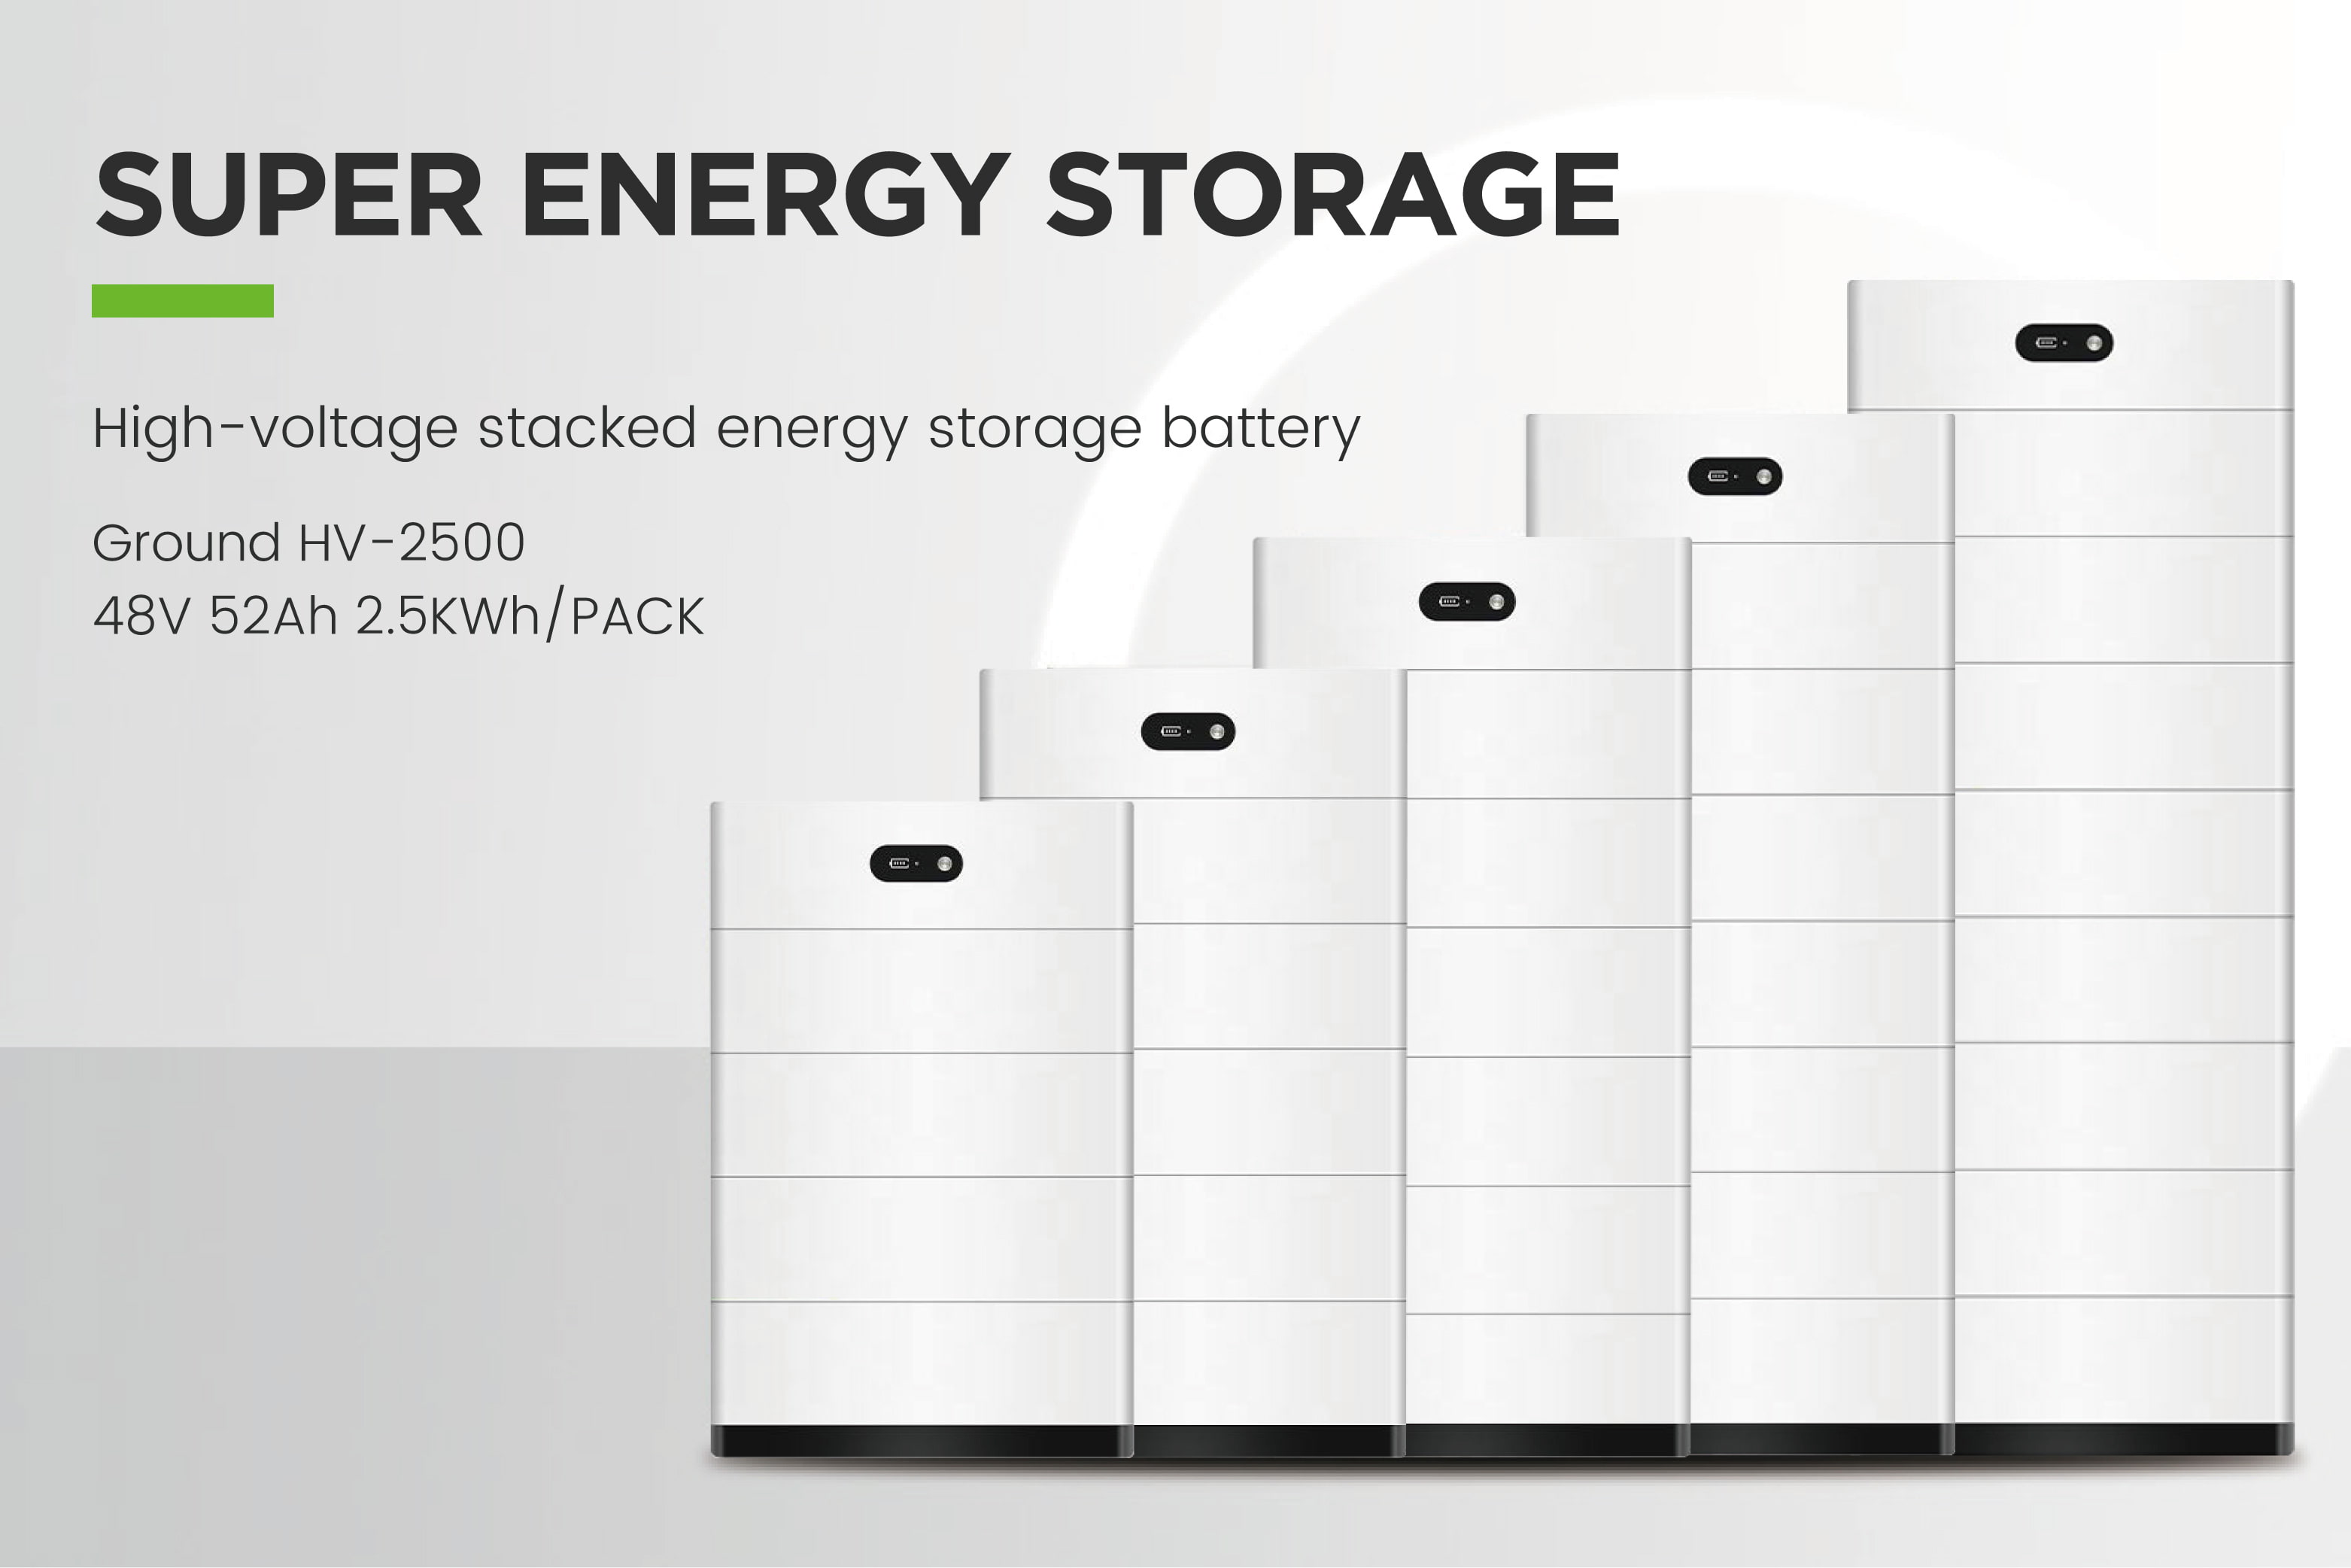 HV Stackable Energy Storage Battery